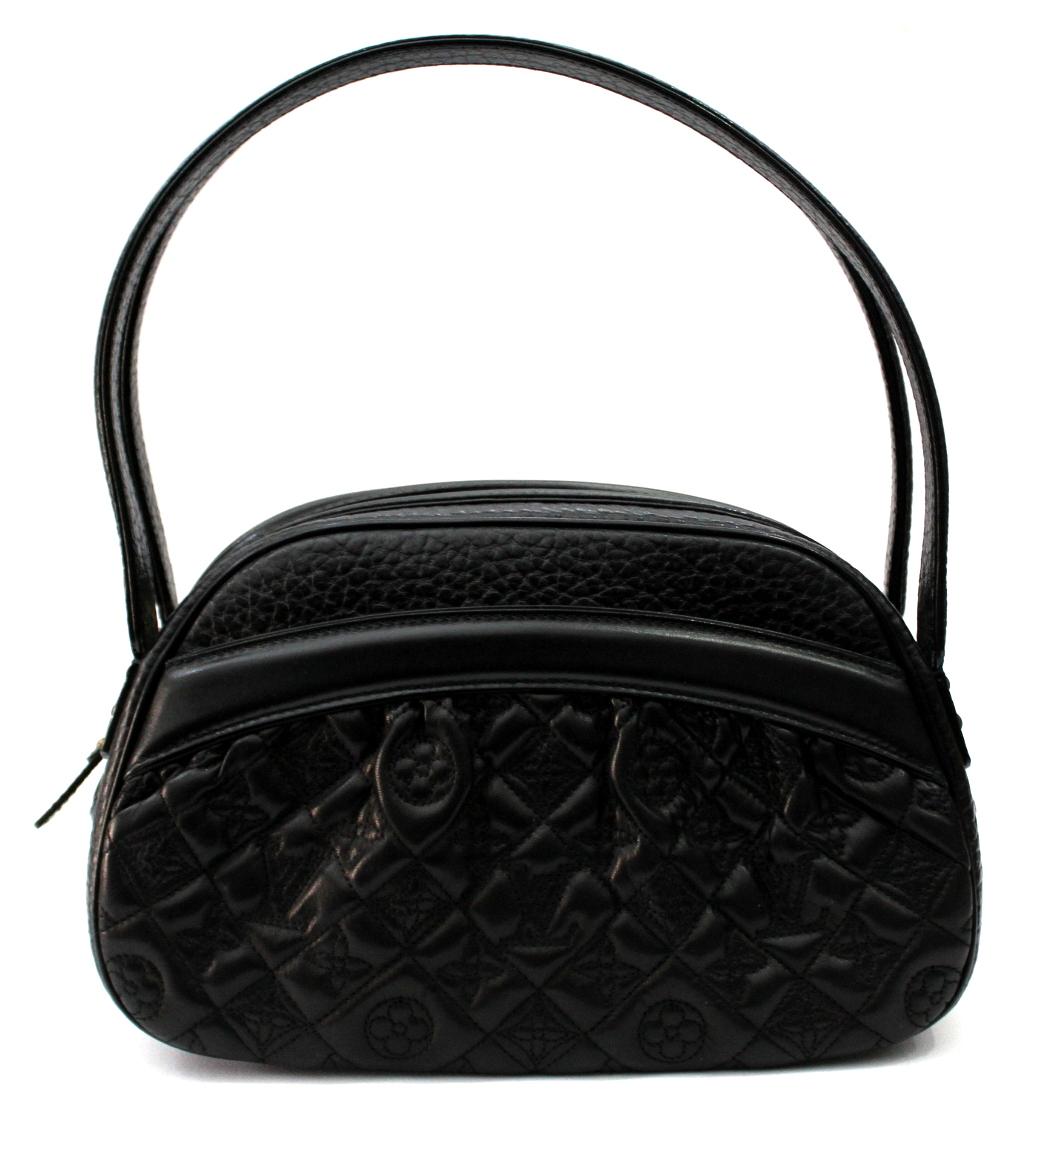 Don't miss out on your opportunity to own this rare and limited edition Louis Vuitton Limited Edition Black Monogram Klara Vienna Bag. It features gorgeous black quilted lambskin leather meticulously embroidered to reveal the Monogram pattern and